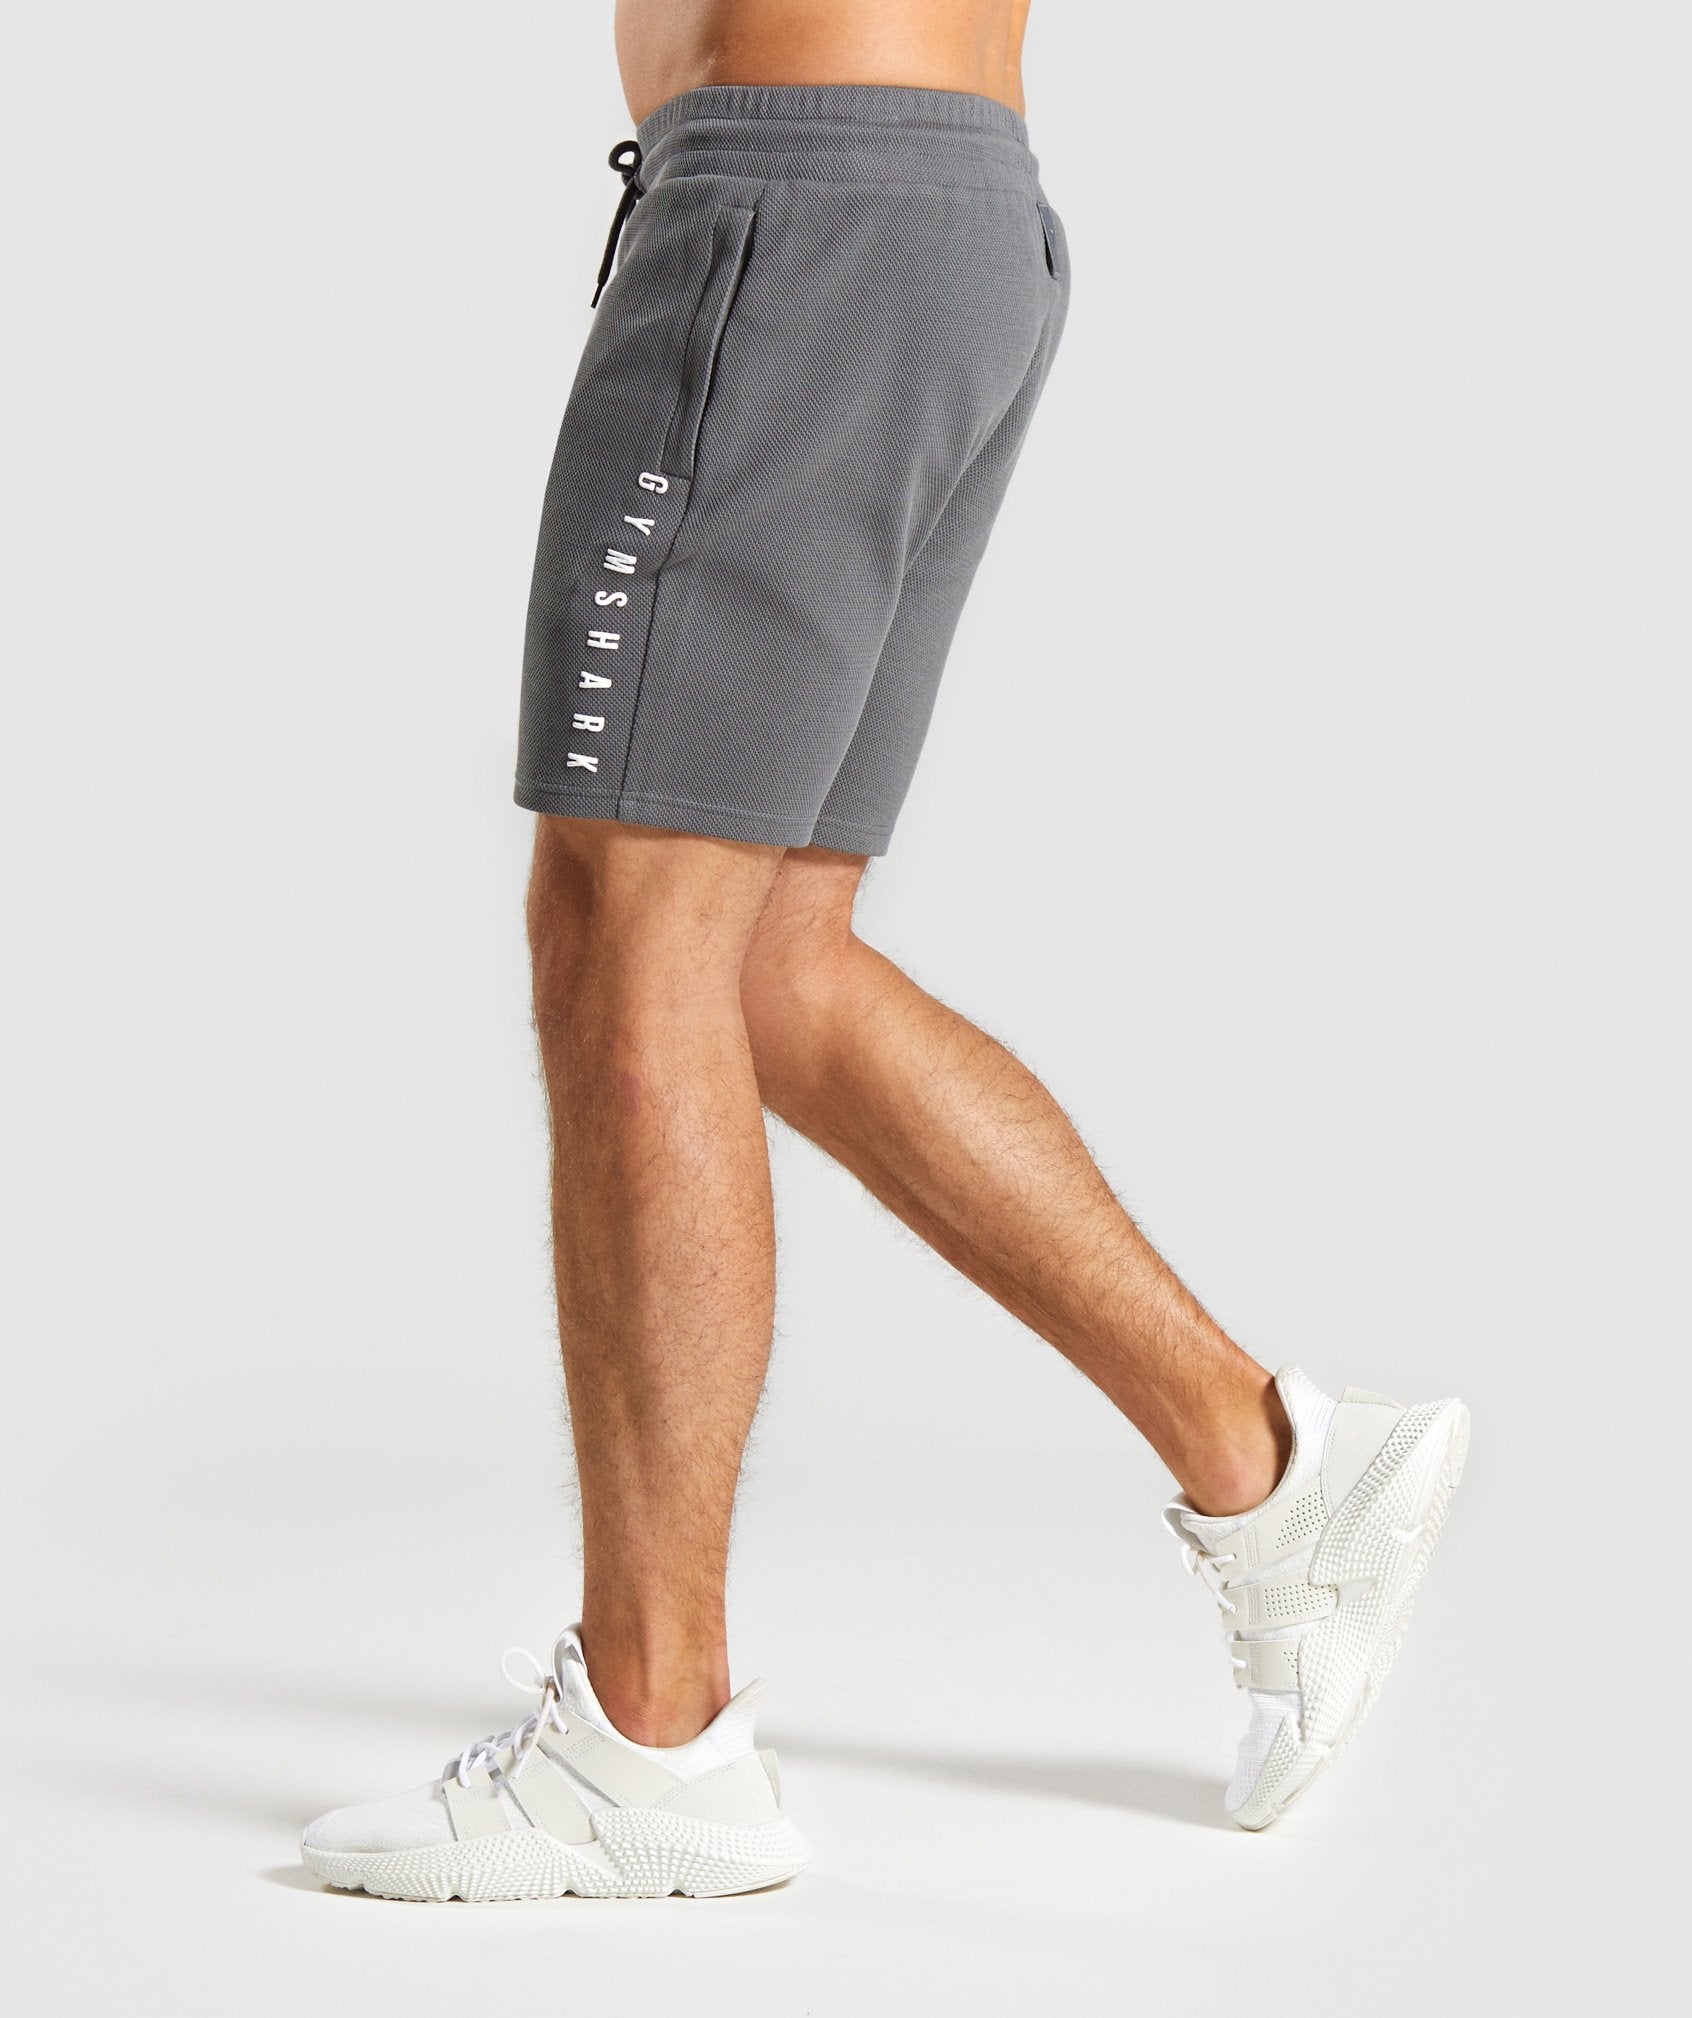 Recharge Shorts in Grey - view 3